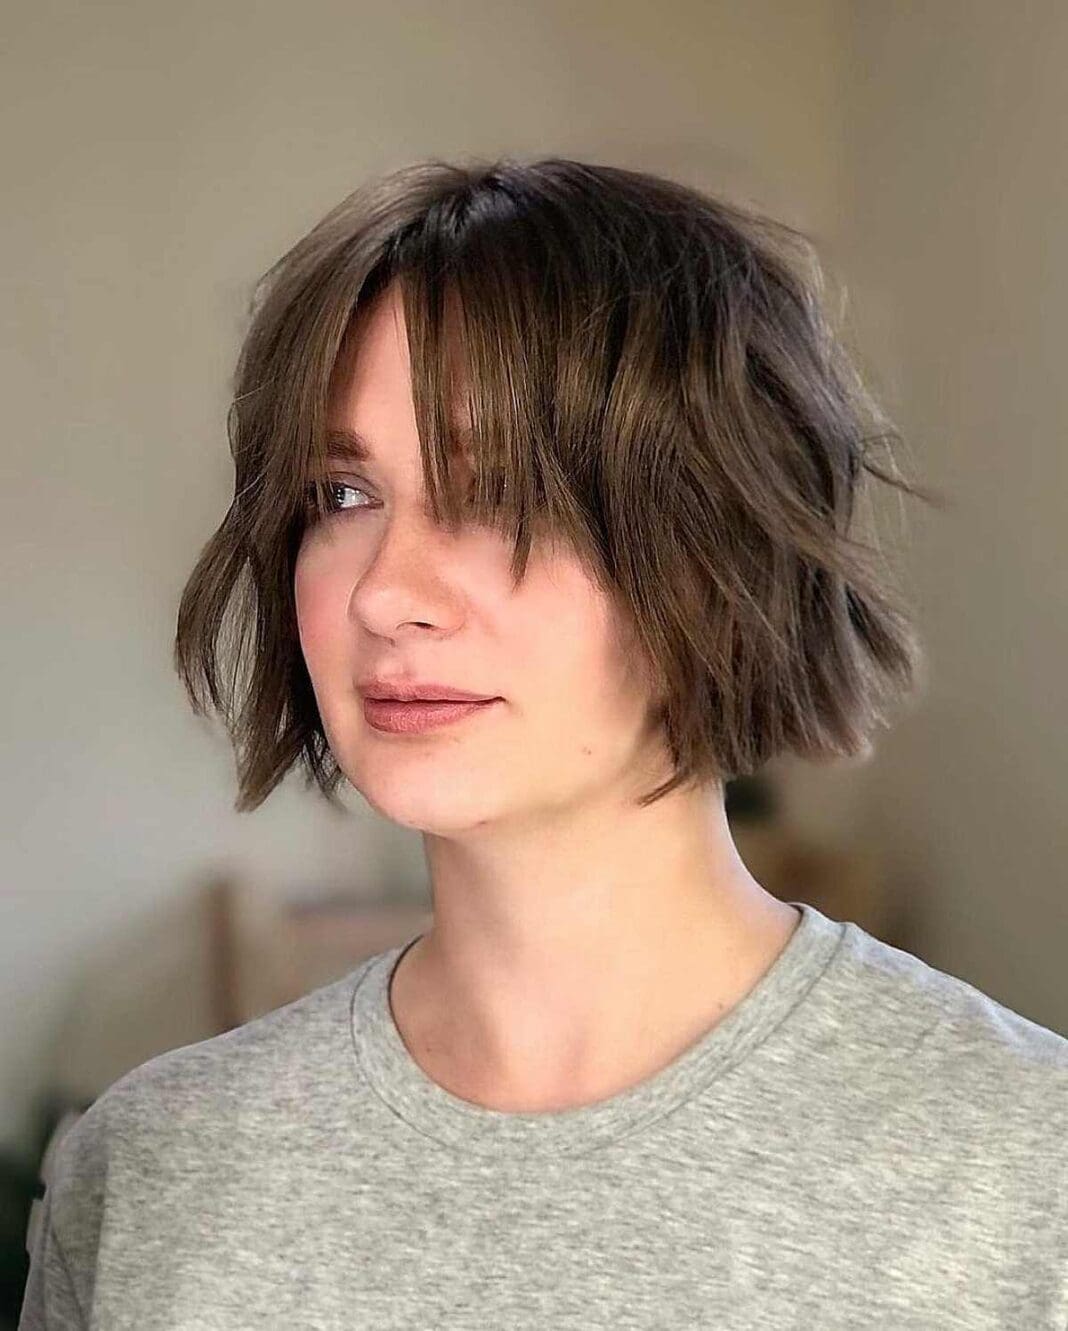 23 Chin-Length Blunt Bob Hair Ideas For Women To Consider in 2023